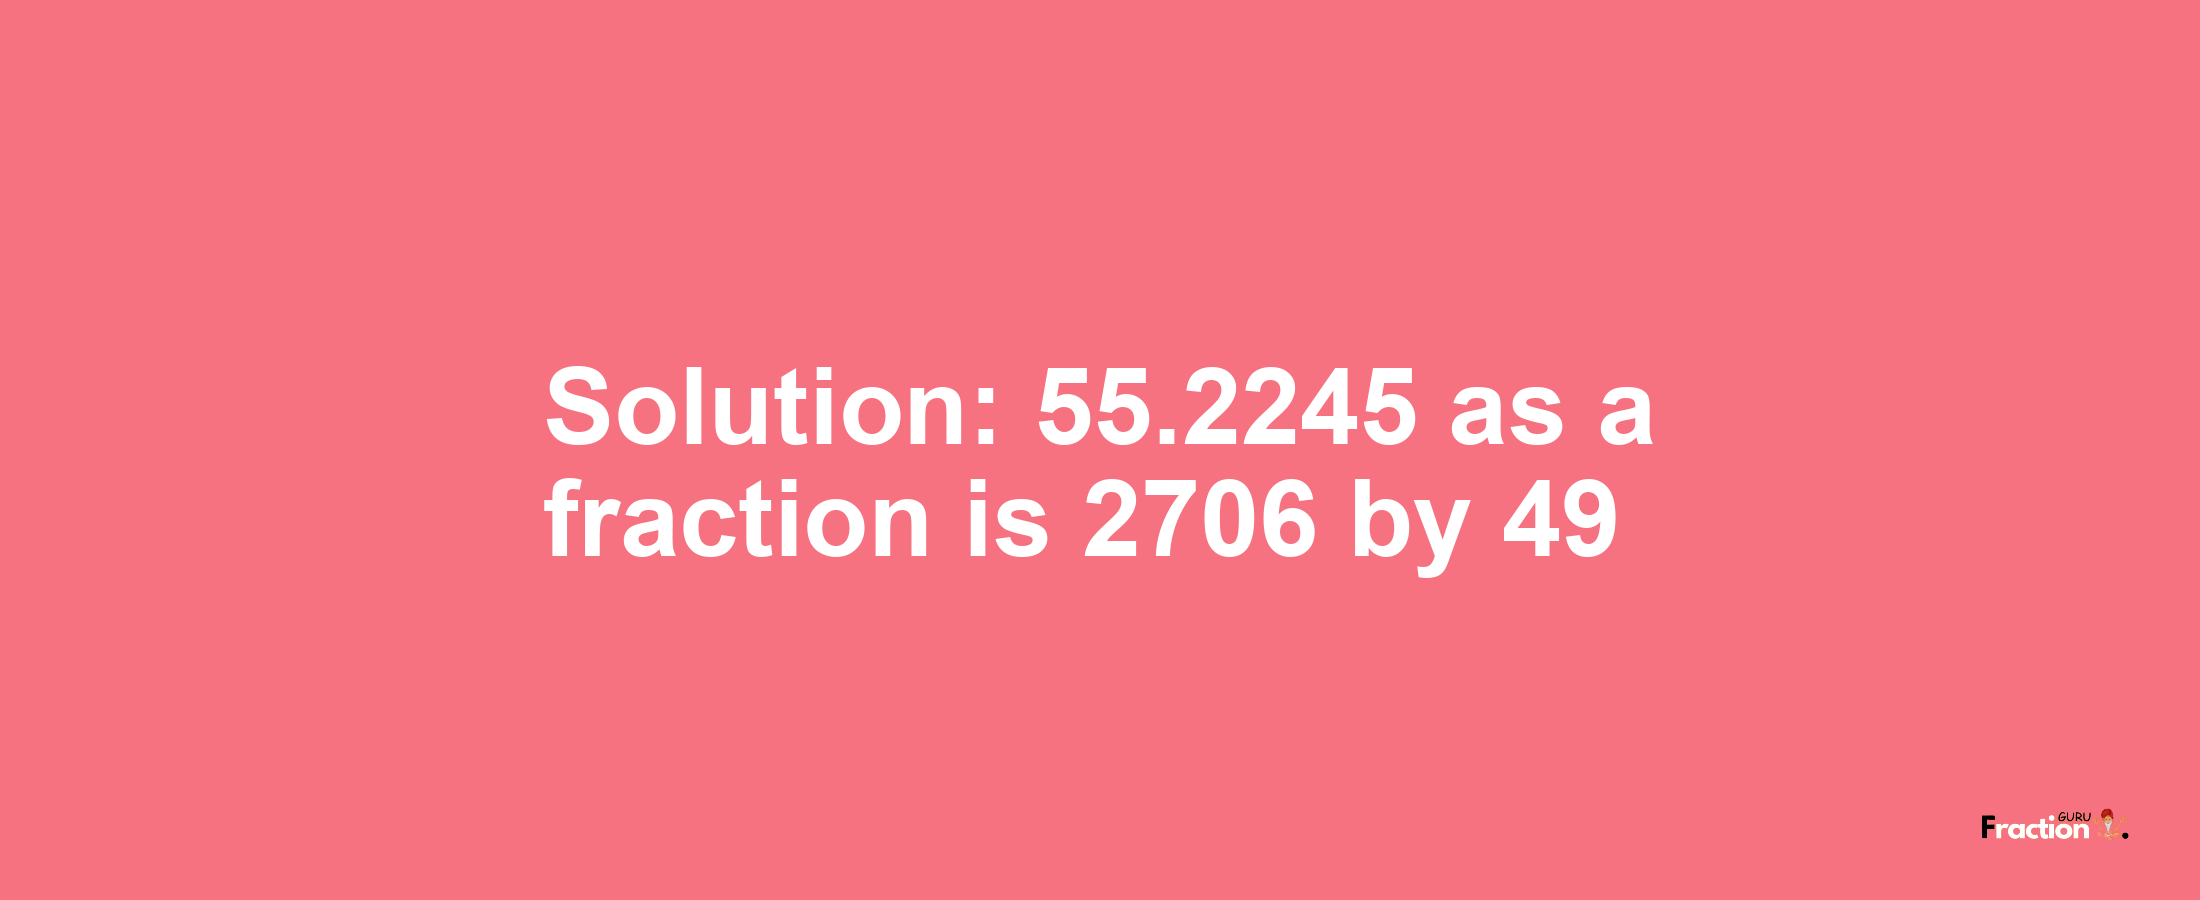 Solution:55.2245 as a fraction is 2706/49